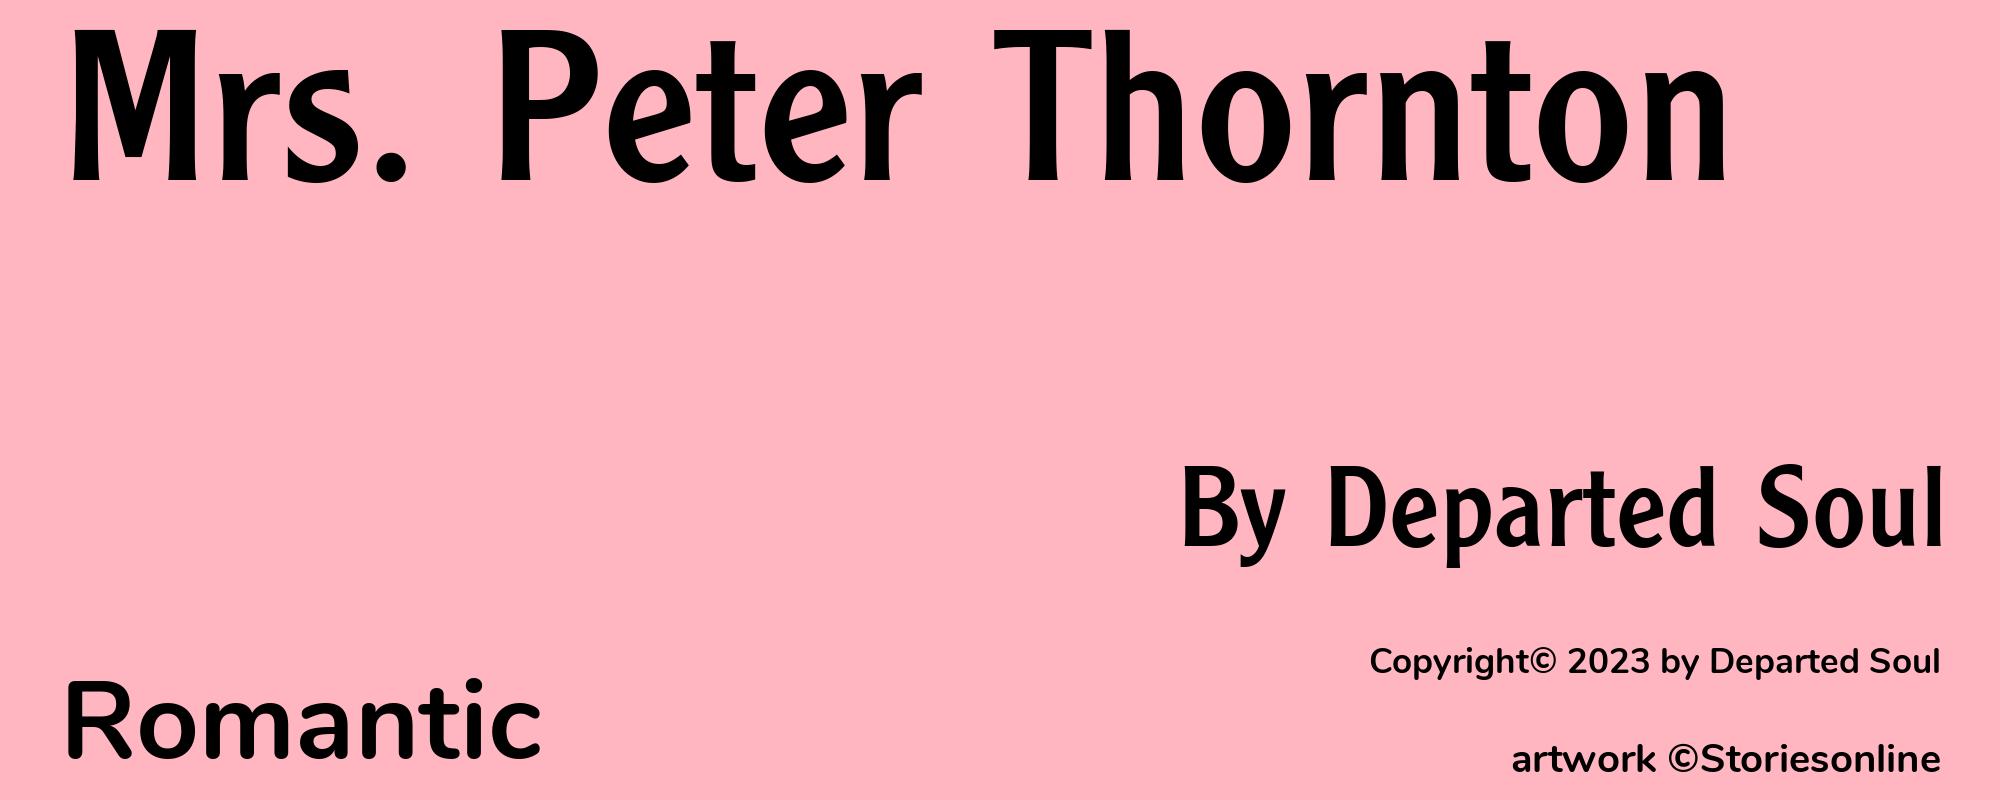 Mrs. Peter Thornton - Cover